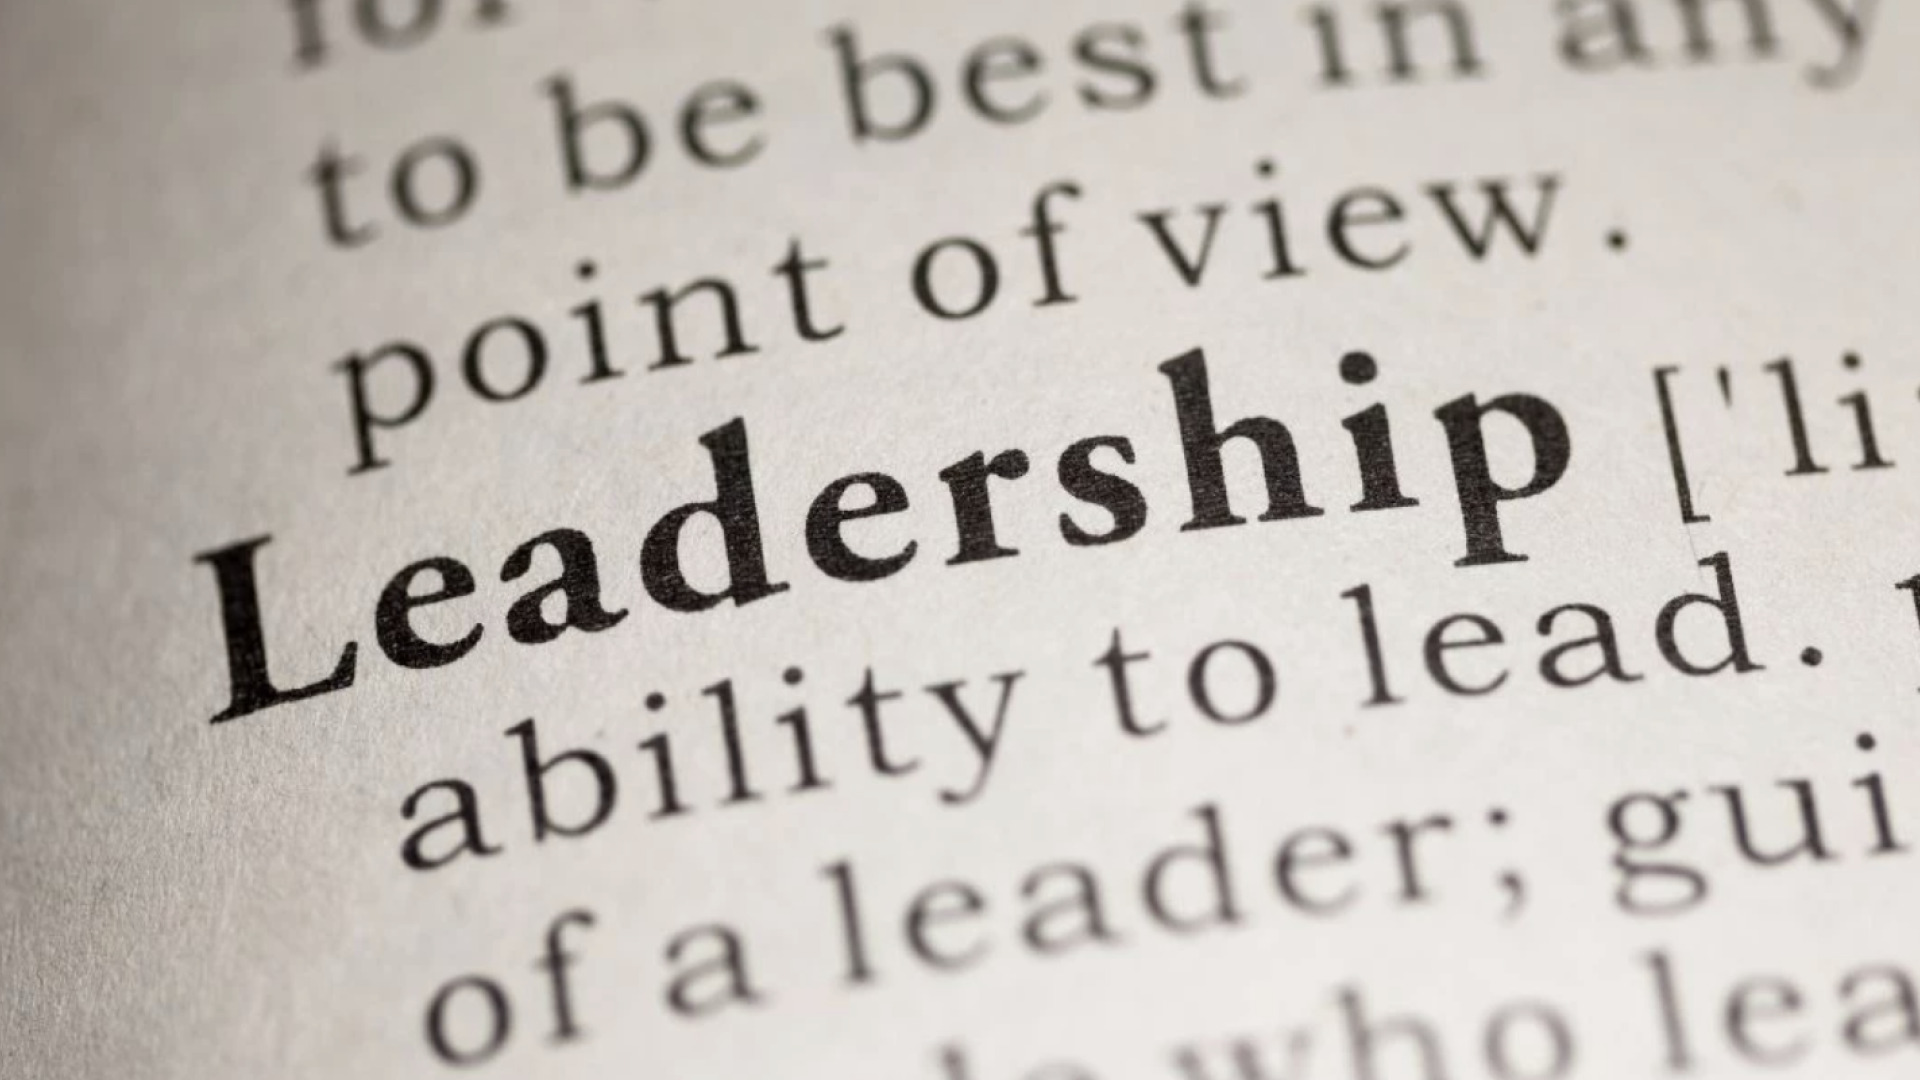 What Makes a Successful Leader